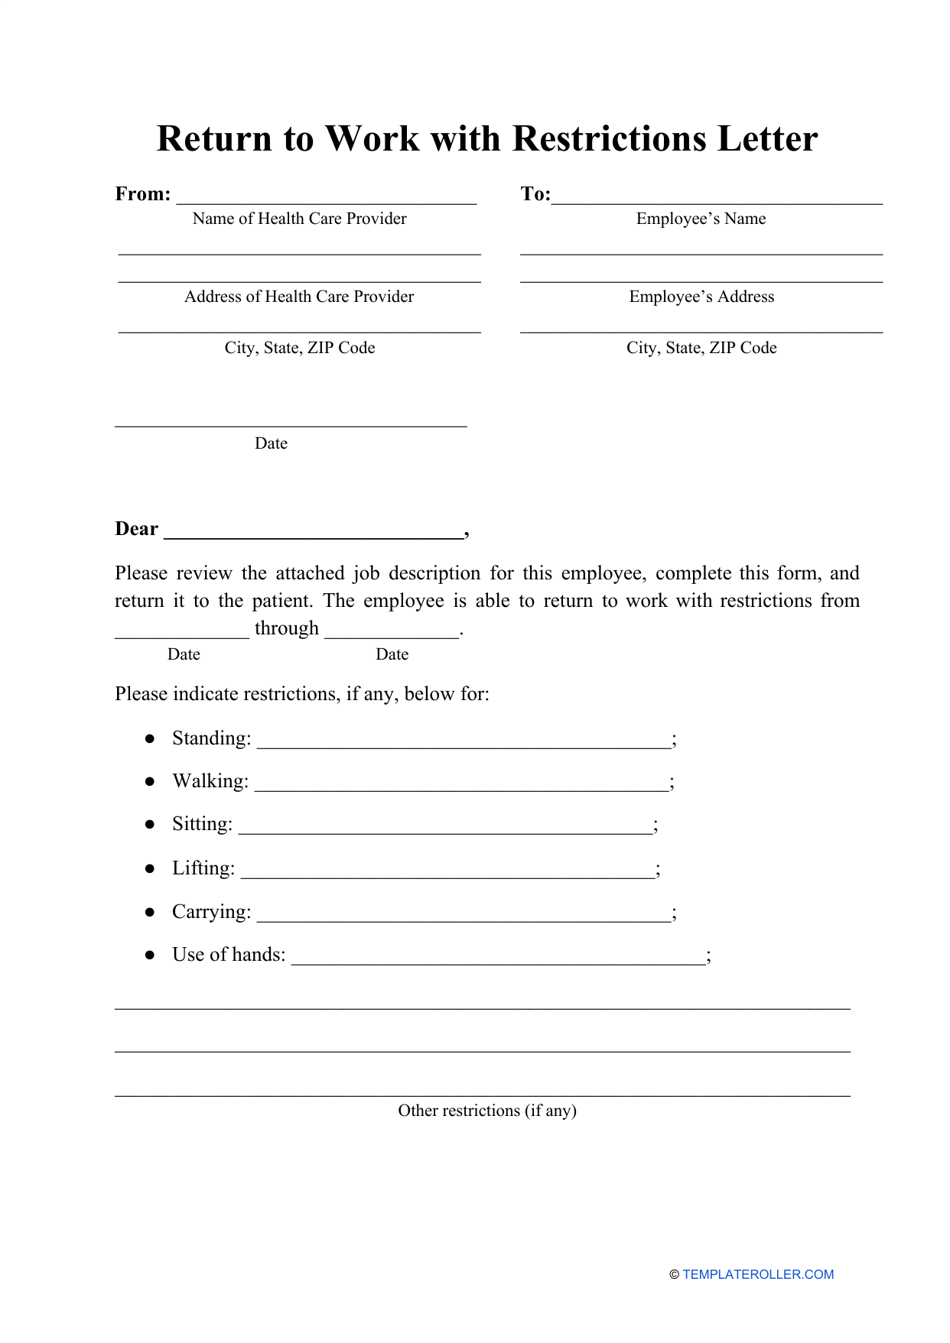 return-to-work-with-restrictions-letter-template-download-printable-pdf